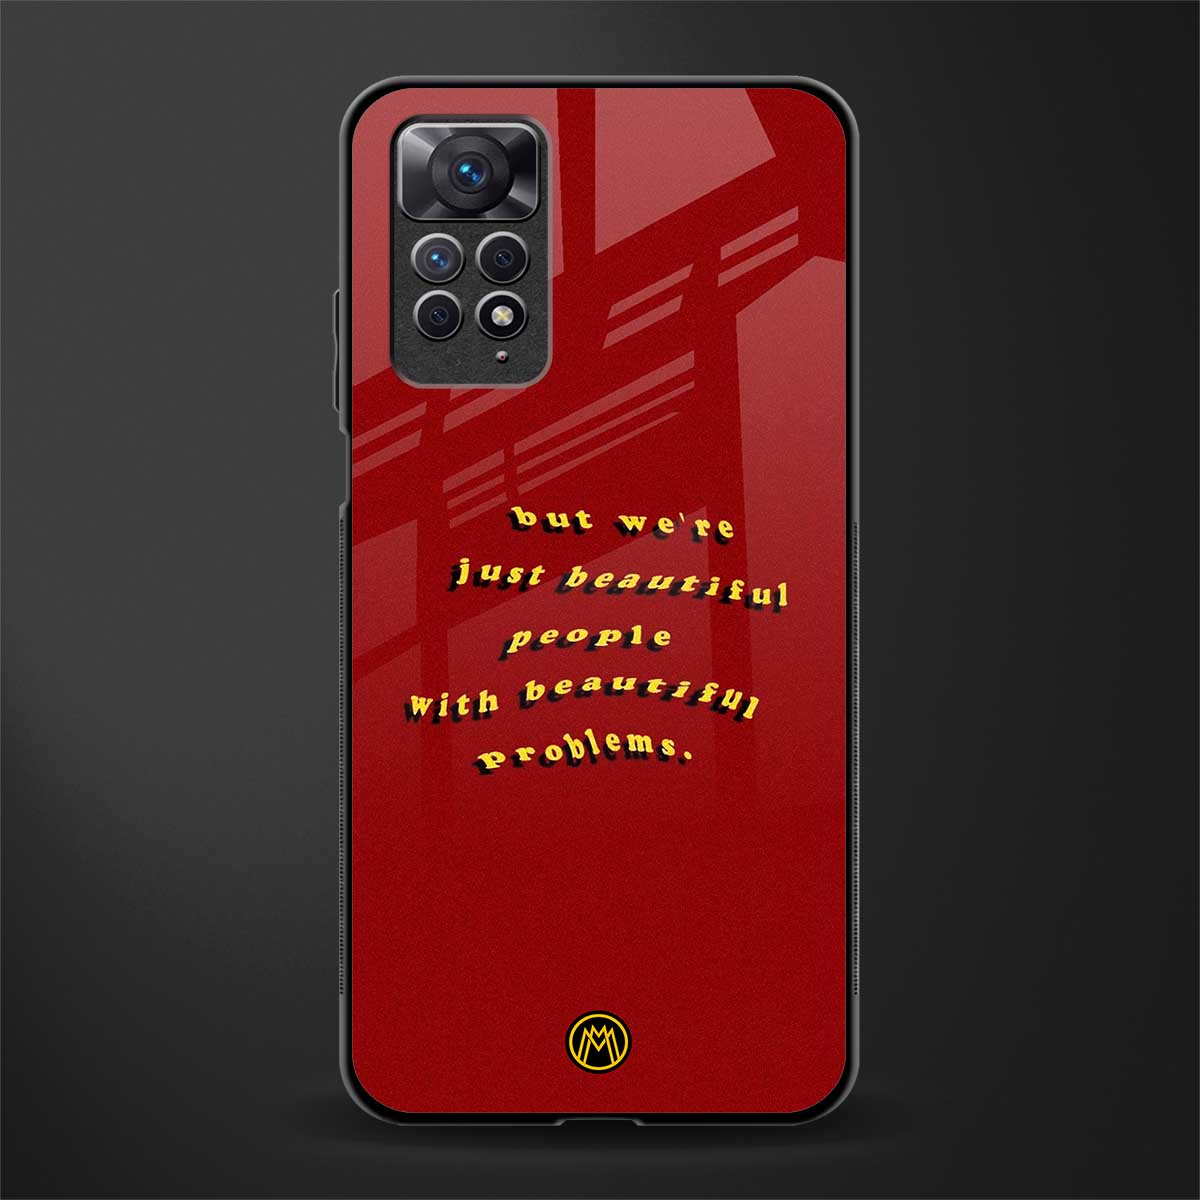 beautiful people with beautiful problems back phone cover | glass case for redmi note 11 pro plus 4g/5g